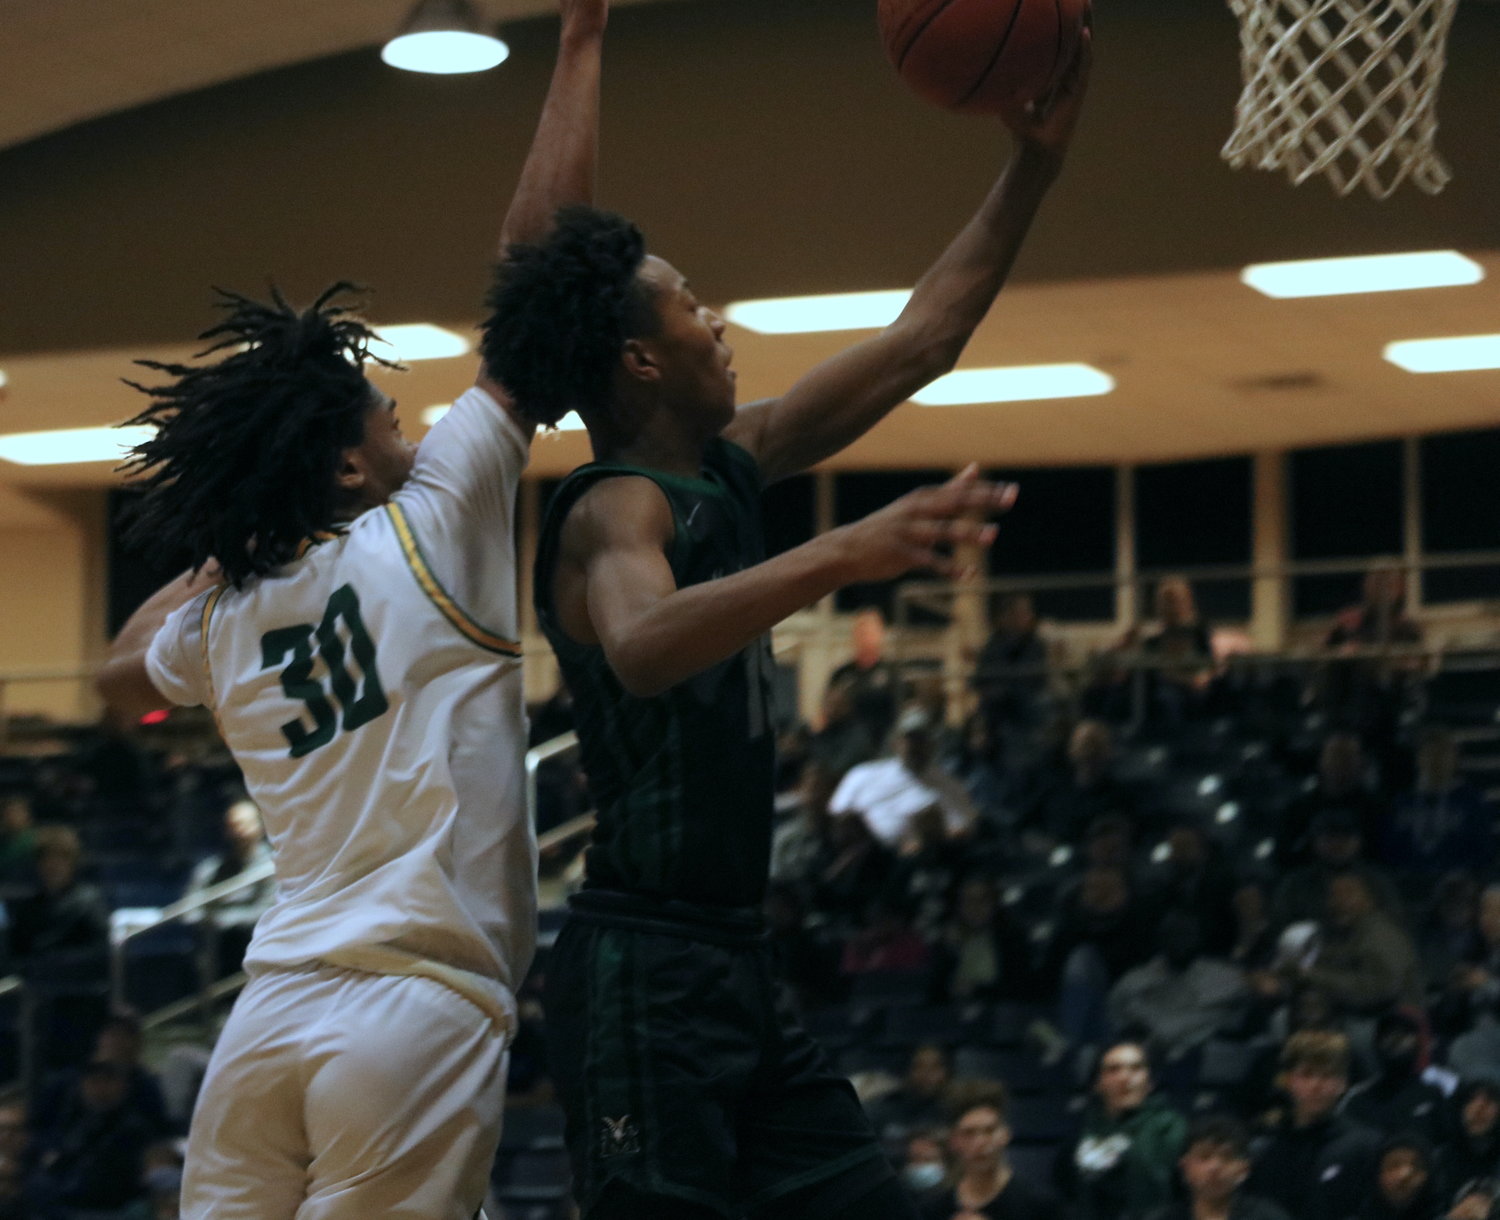 Jamal Chretiene II shoots a layup during Friday’s game between Mayde Creek and Stratford at the Coleman Coliseum.